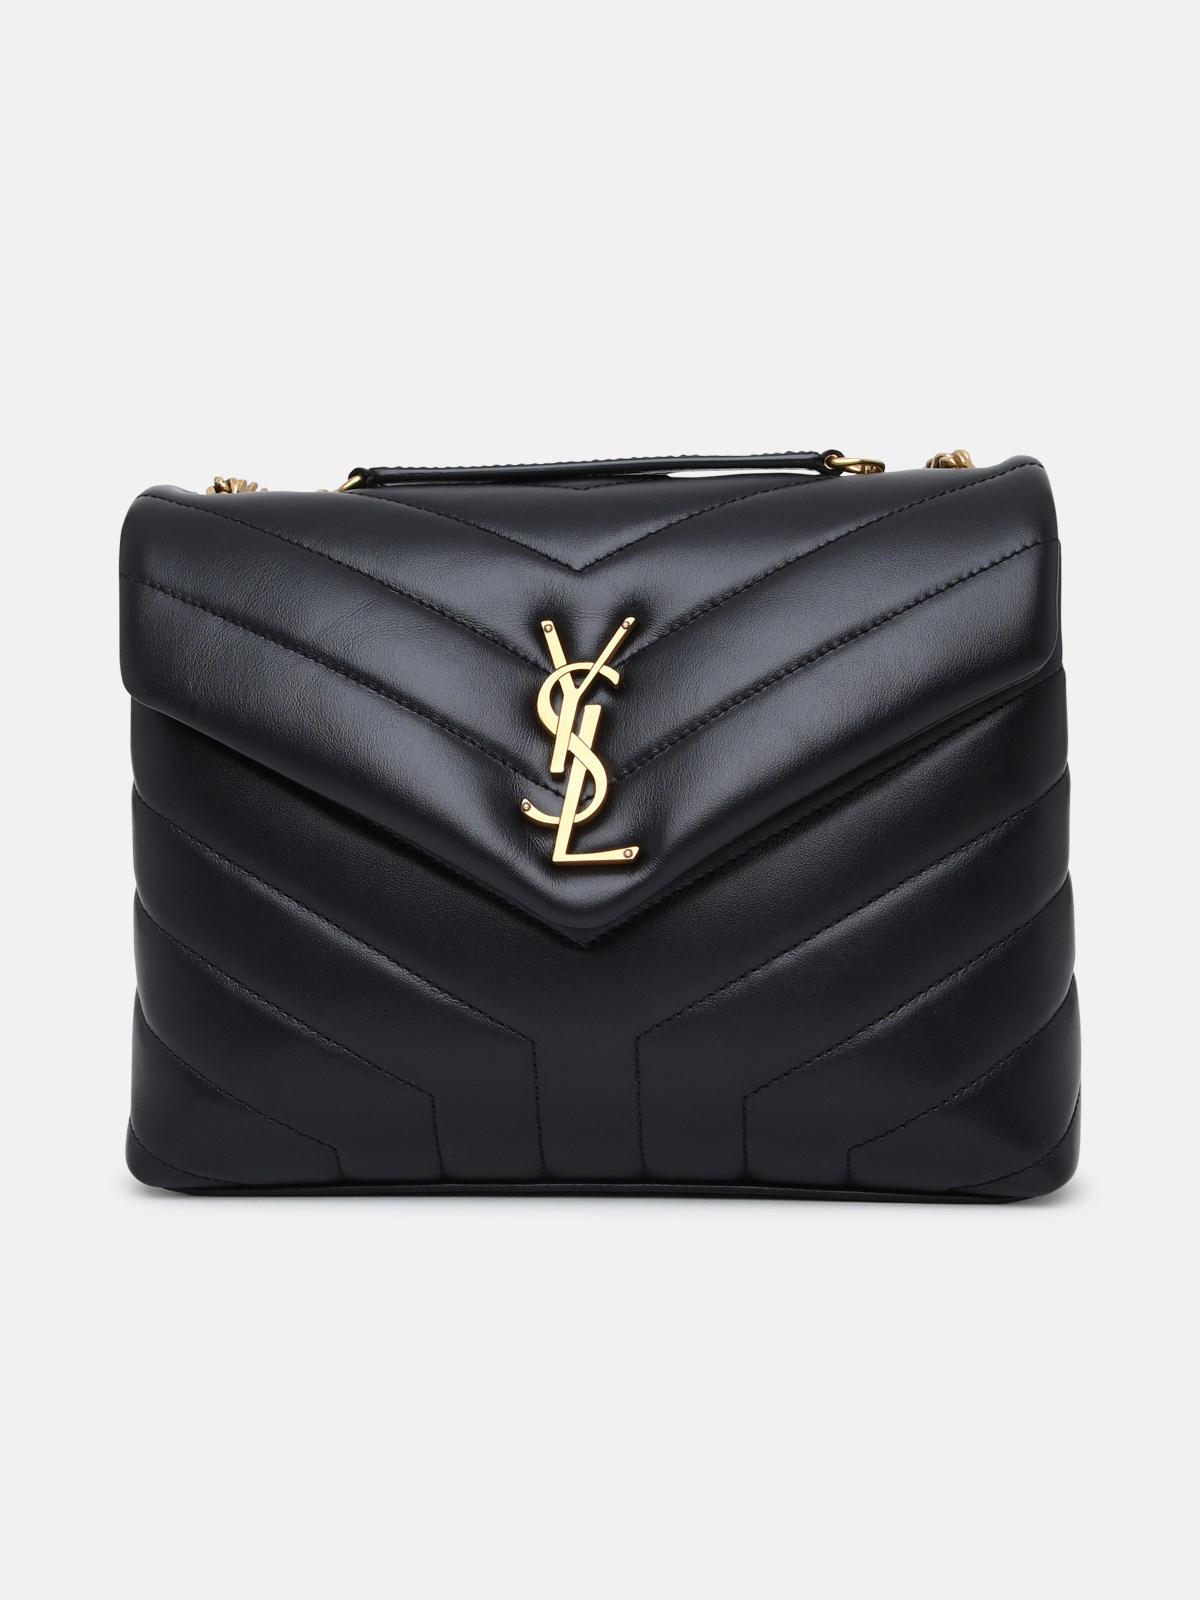 Saint Laurent Small Leather Loulou Bag in Black | Lyst